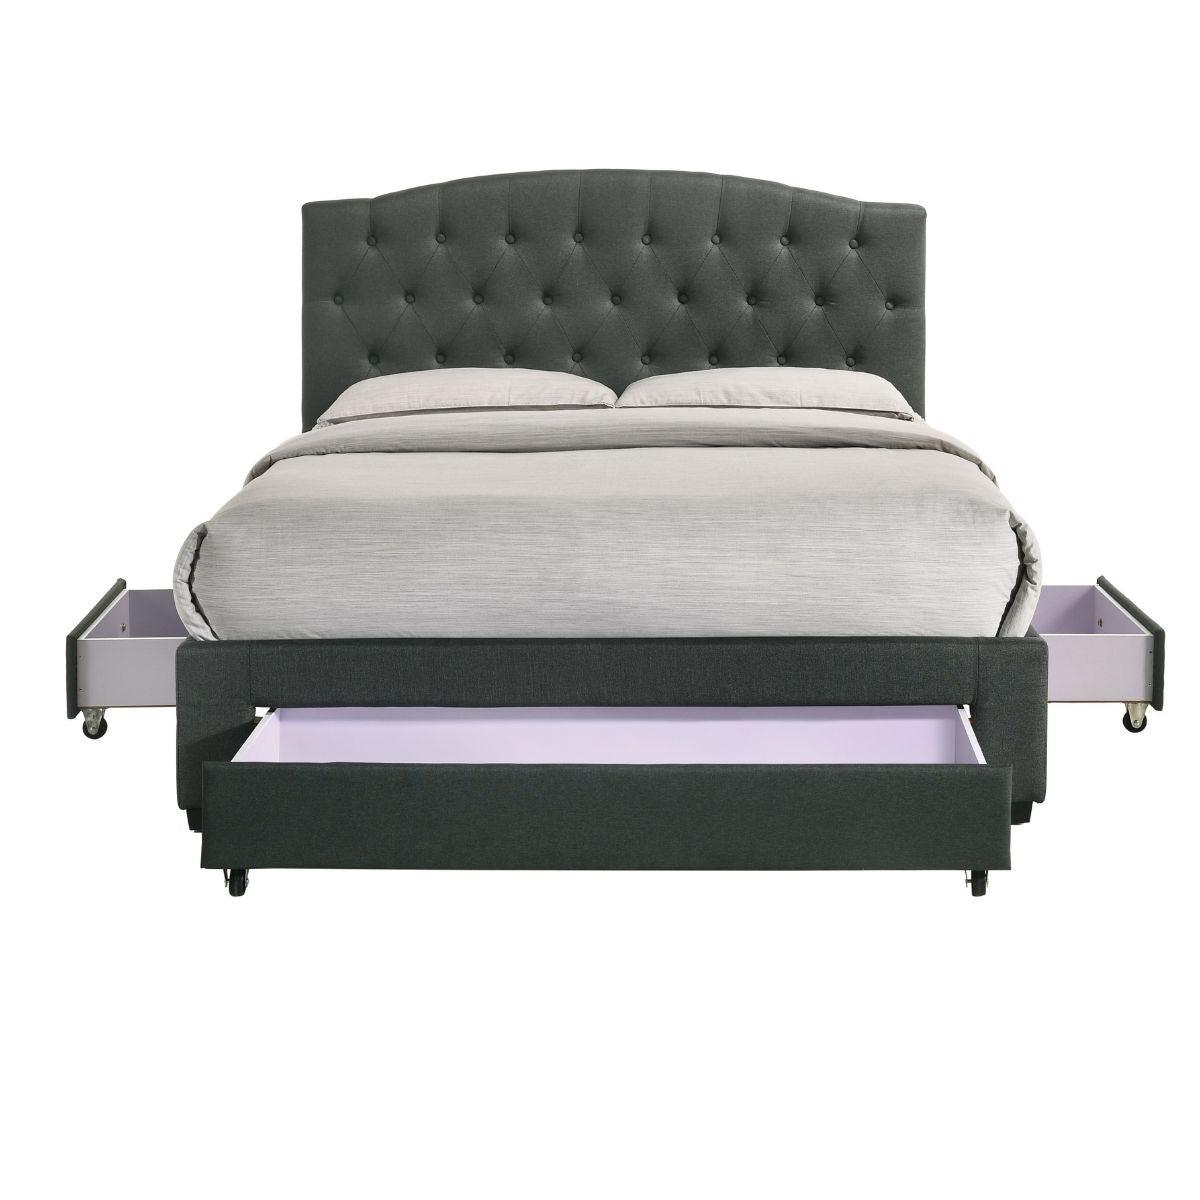 French Provincial Modern Fabric Platform Bed Base Frame with Storage Drawers King Charcoal